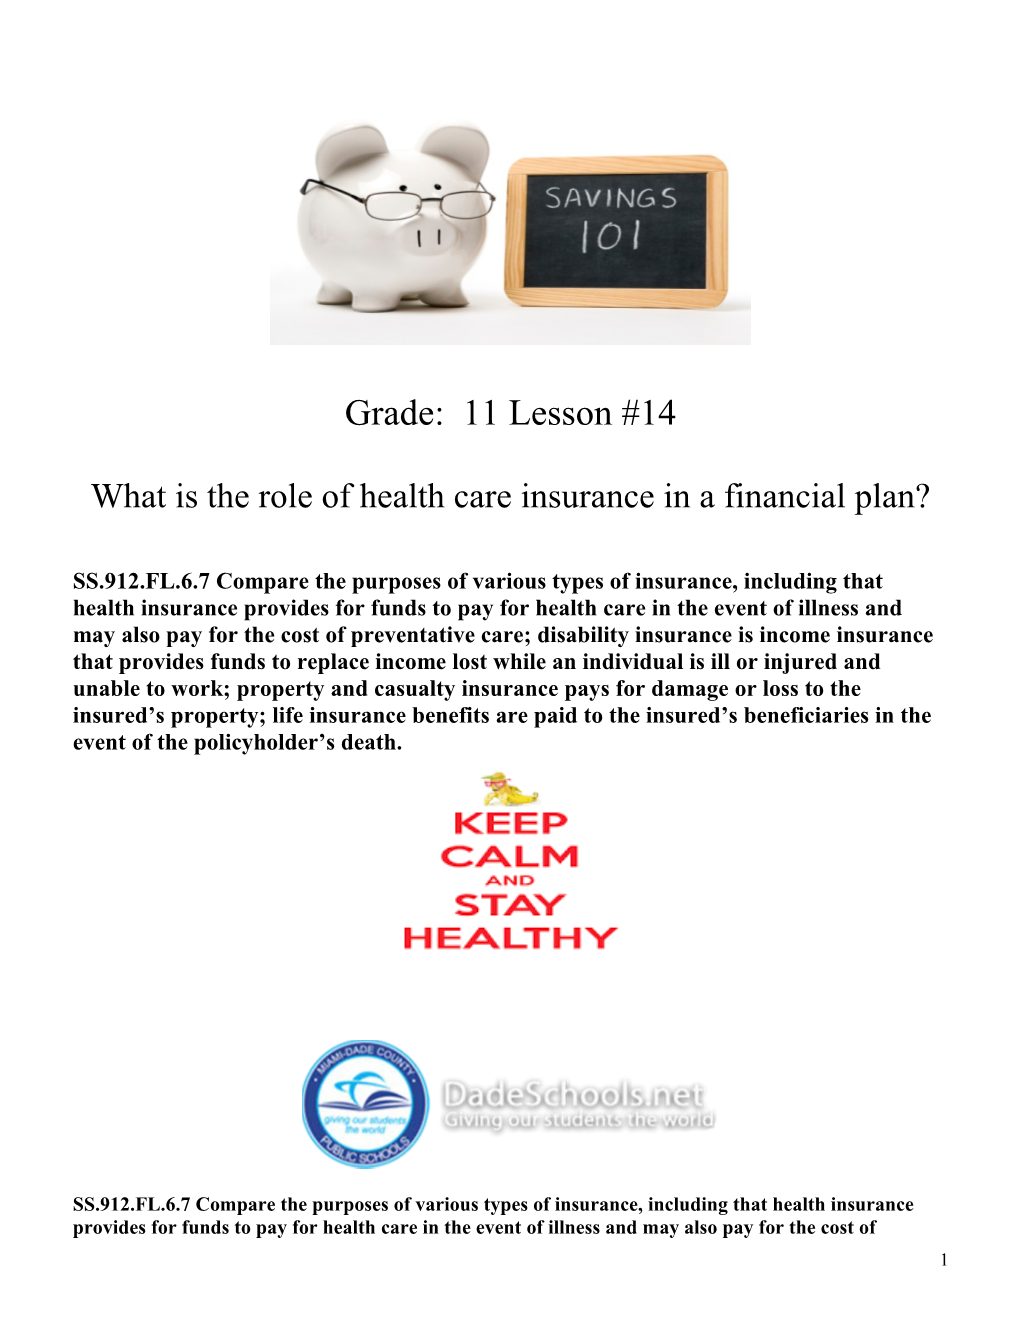 What Is the Role of Health Care Insurance in a Financial Plan?